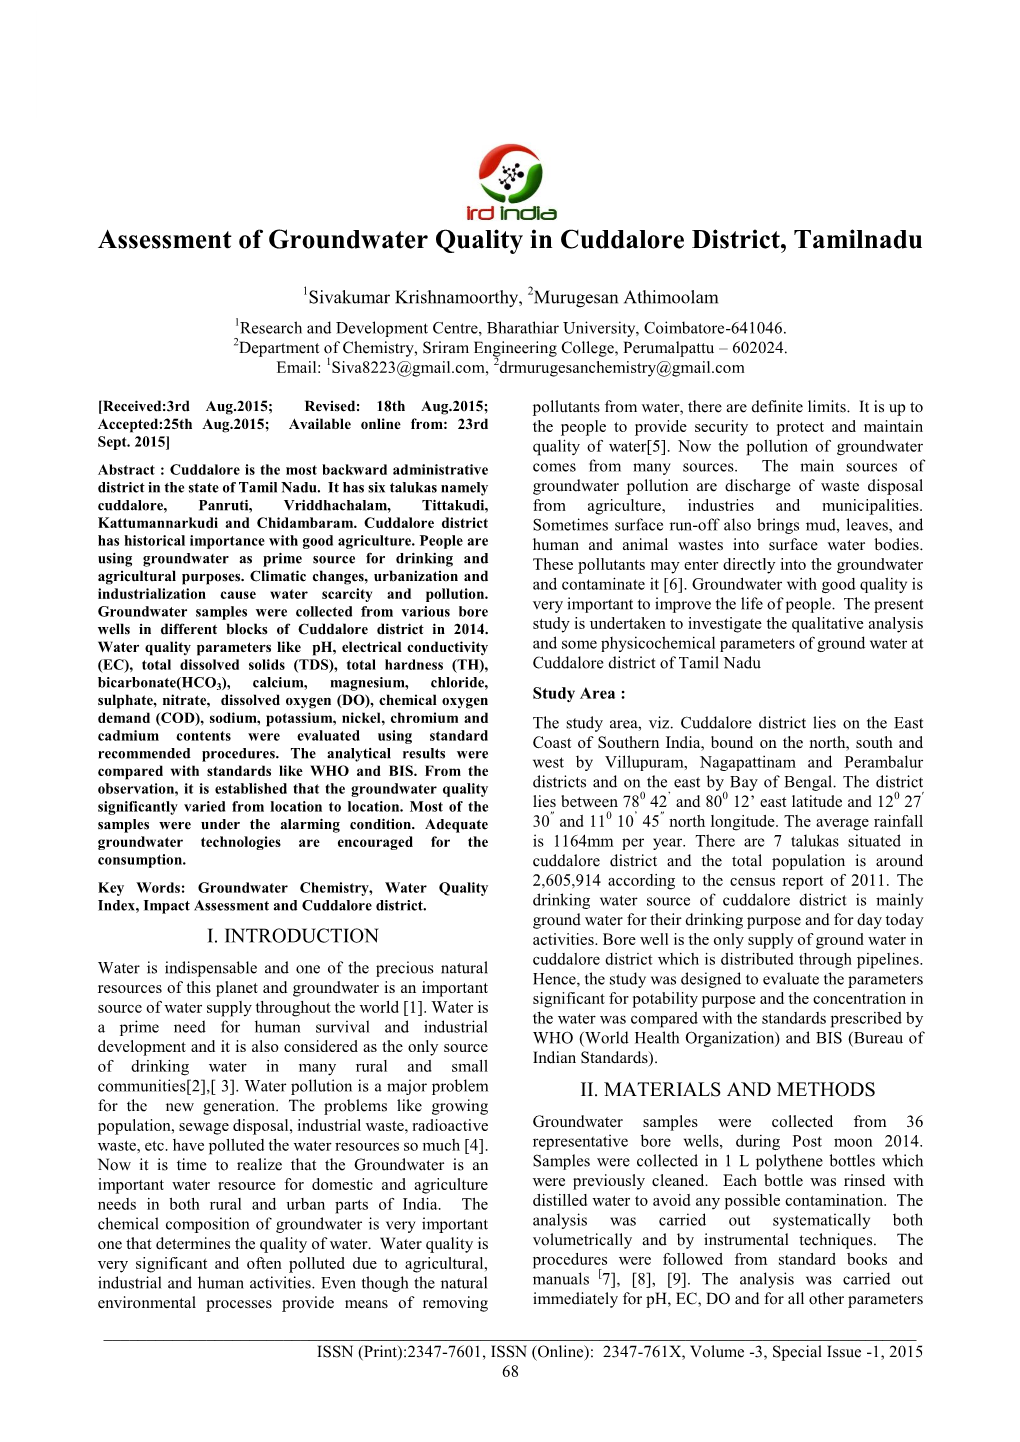 Assessment of Groundwater Quality in Cuddalore District, Tamilnadu